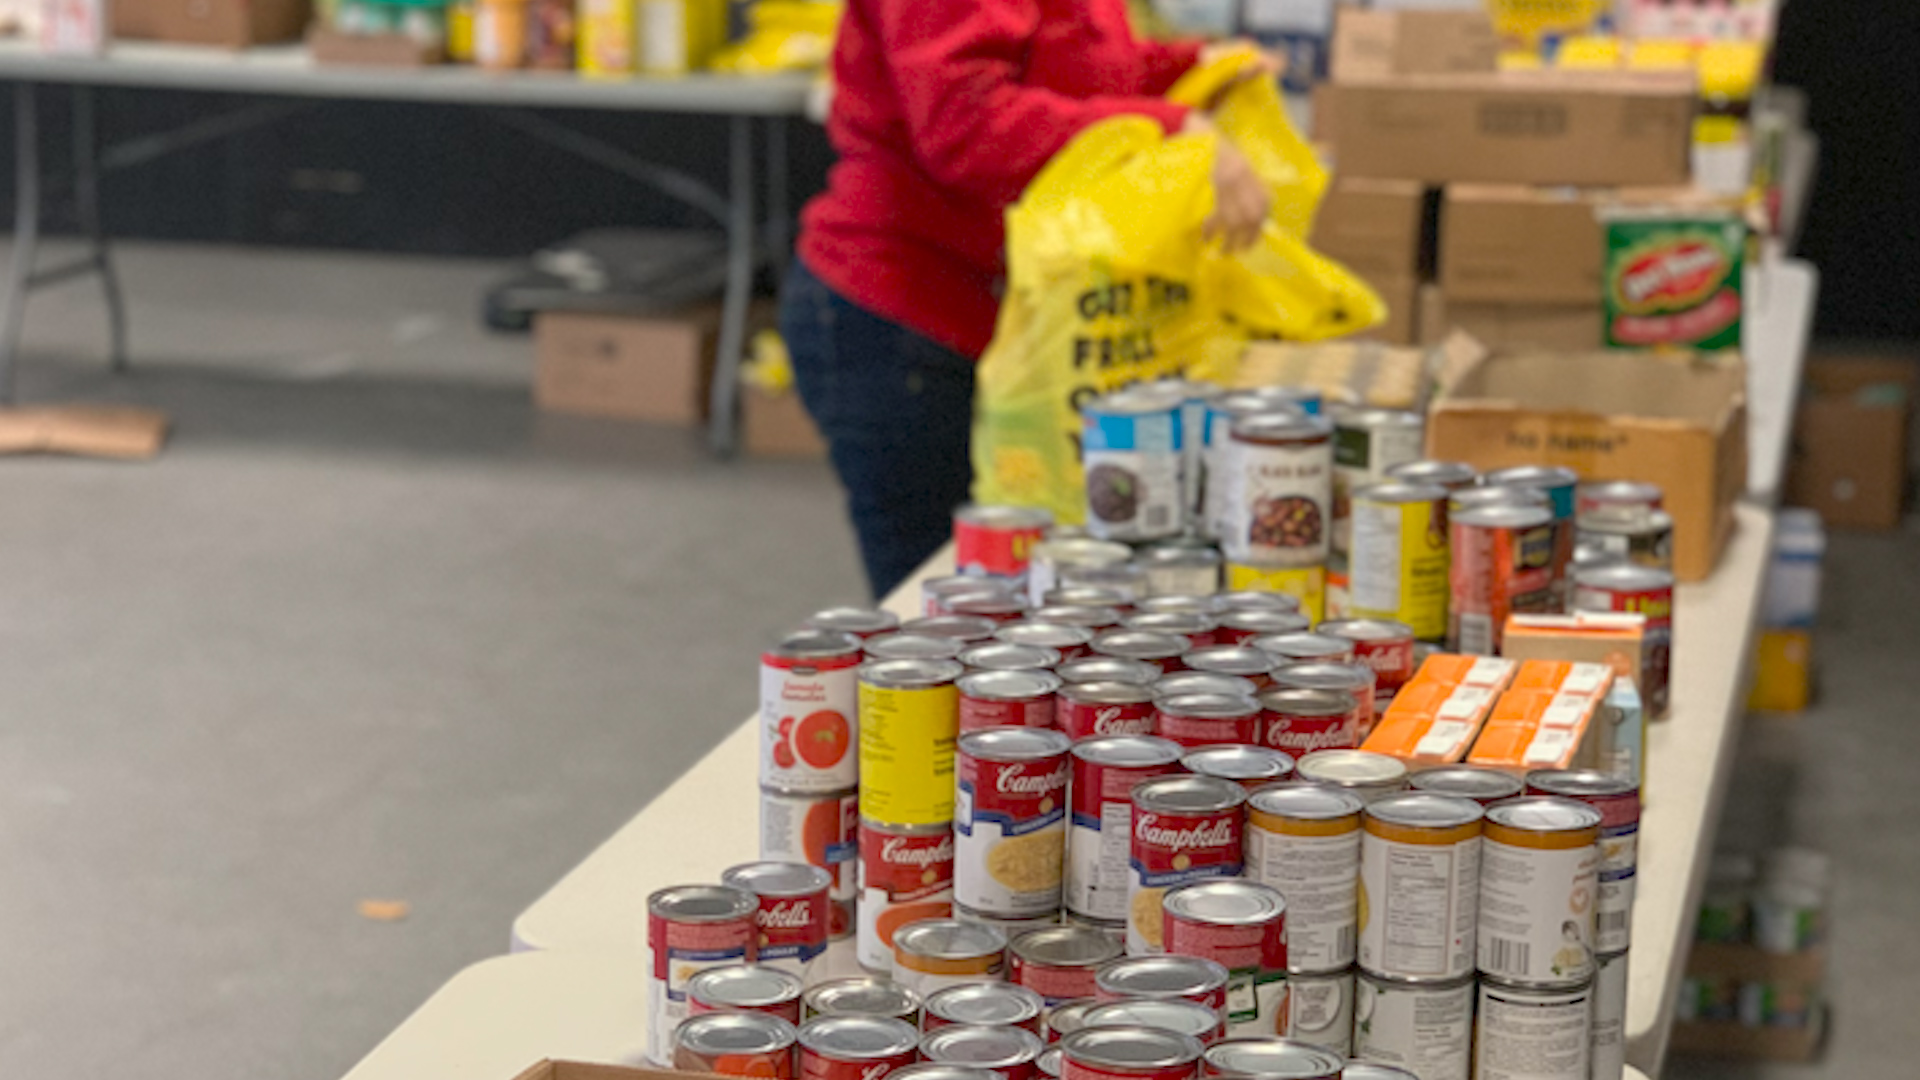 ‘Phenomenal’: London Food Bank’s latest drive receives impressive number of donations